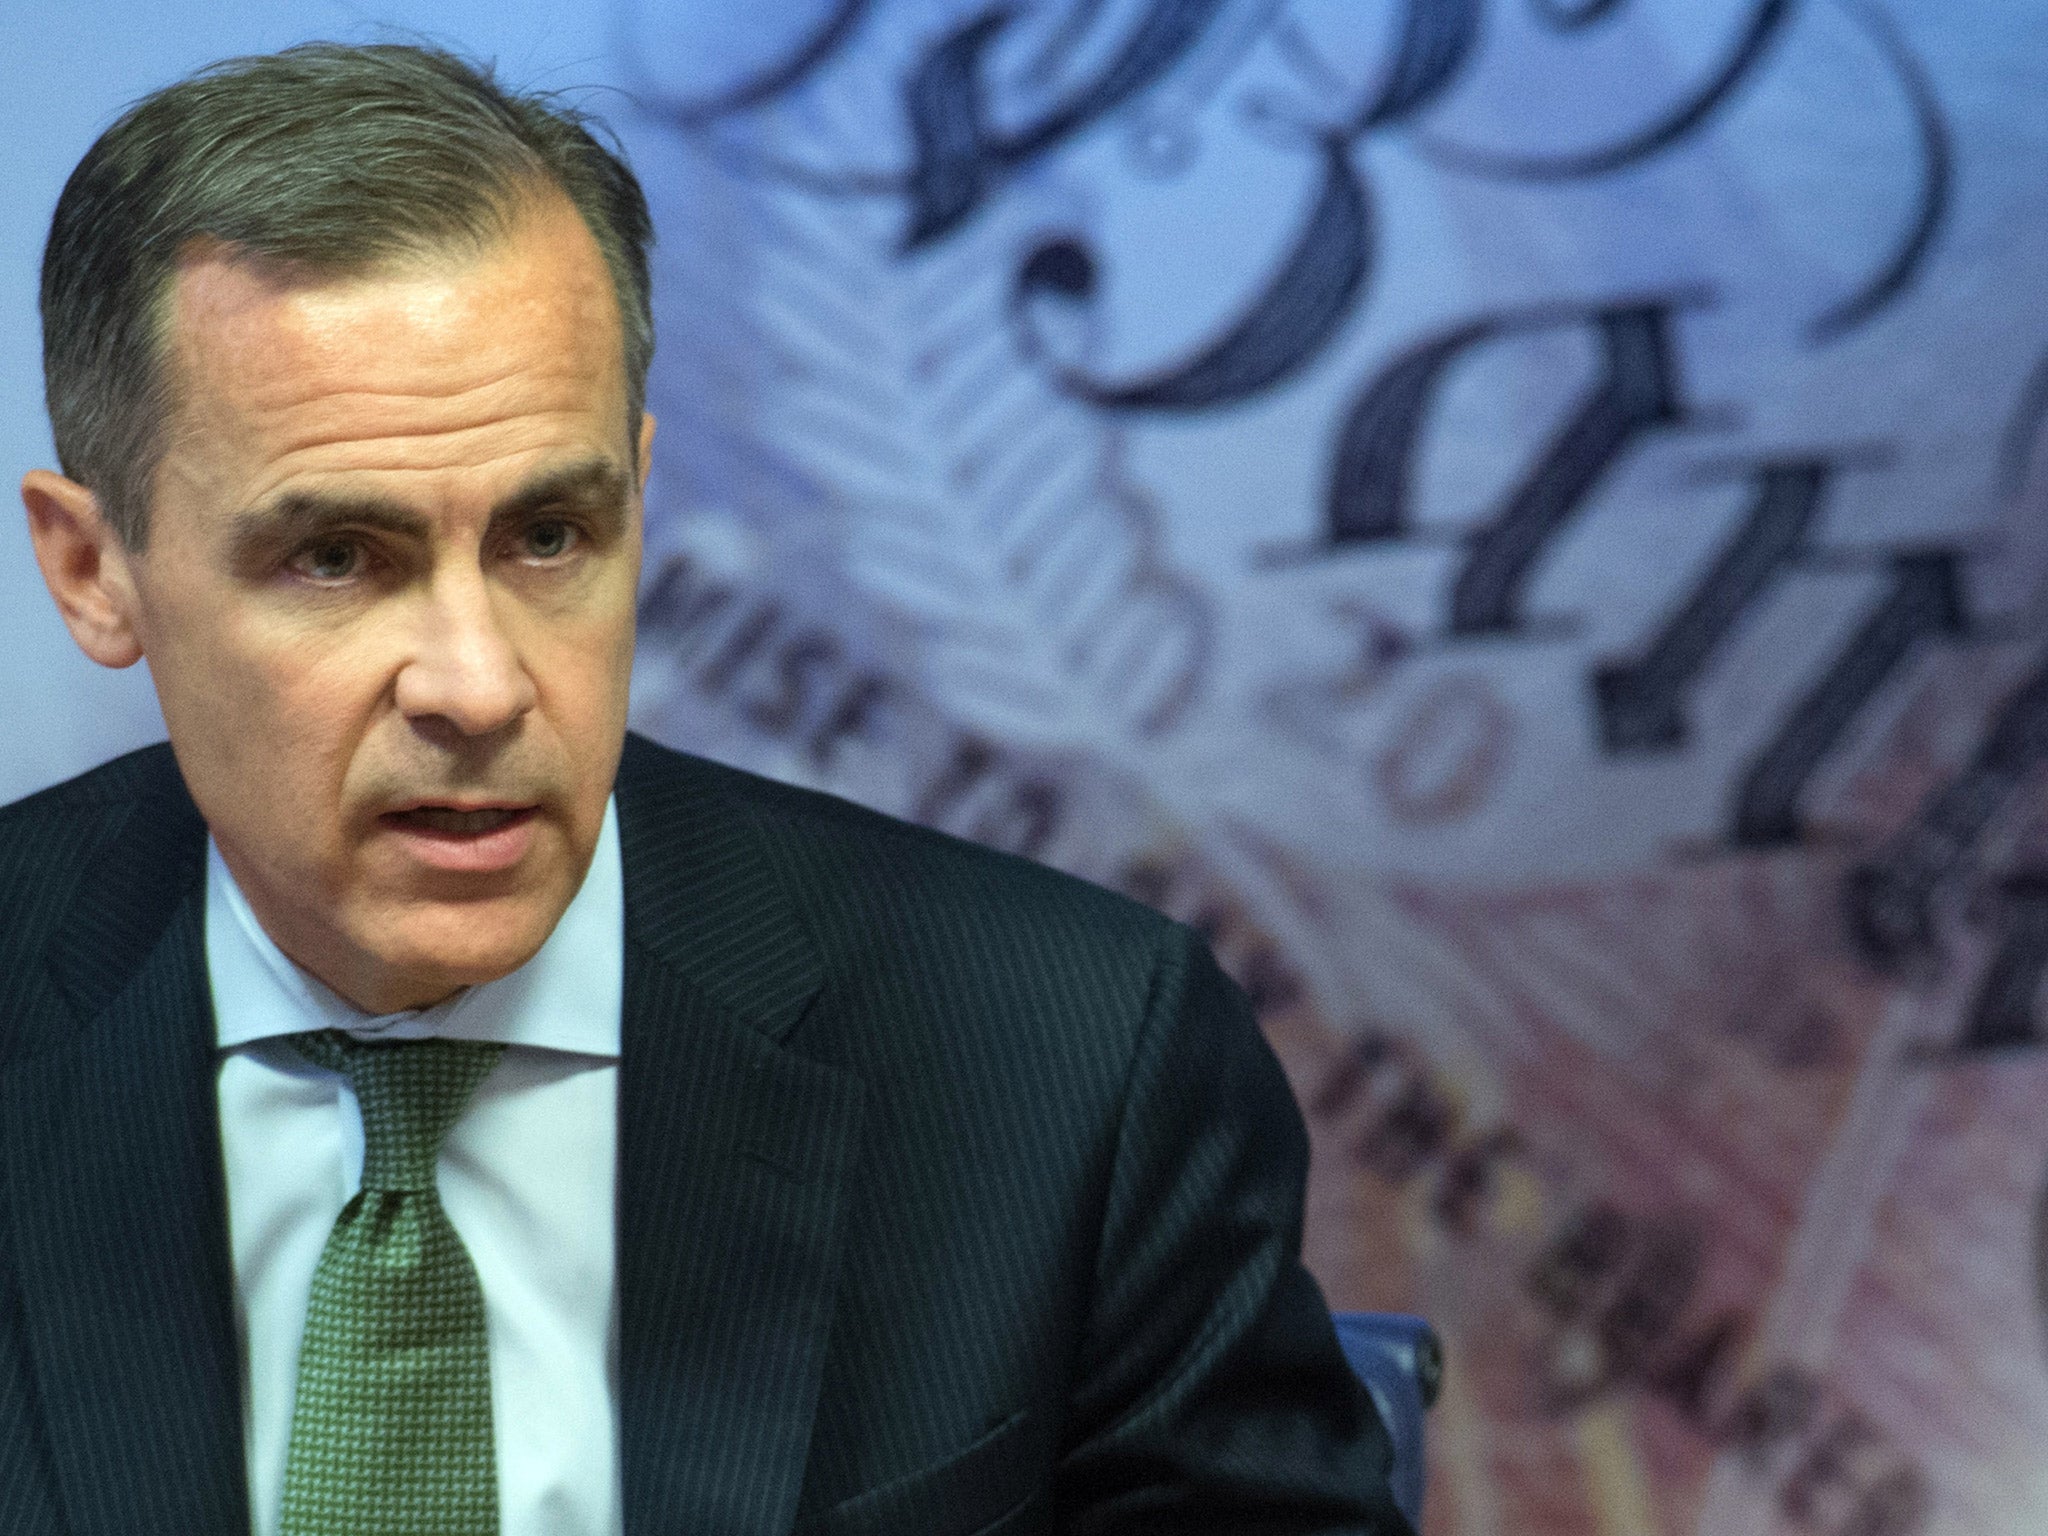 The Governor of the Bank of England Mark Carney may soon be deciding whether decide to increase interest rates if unemployment drops further